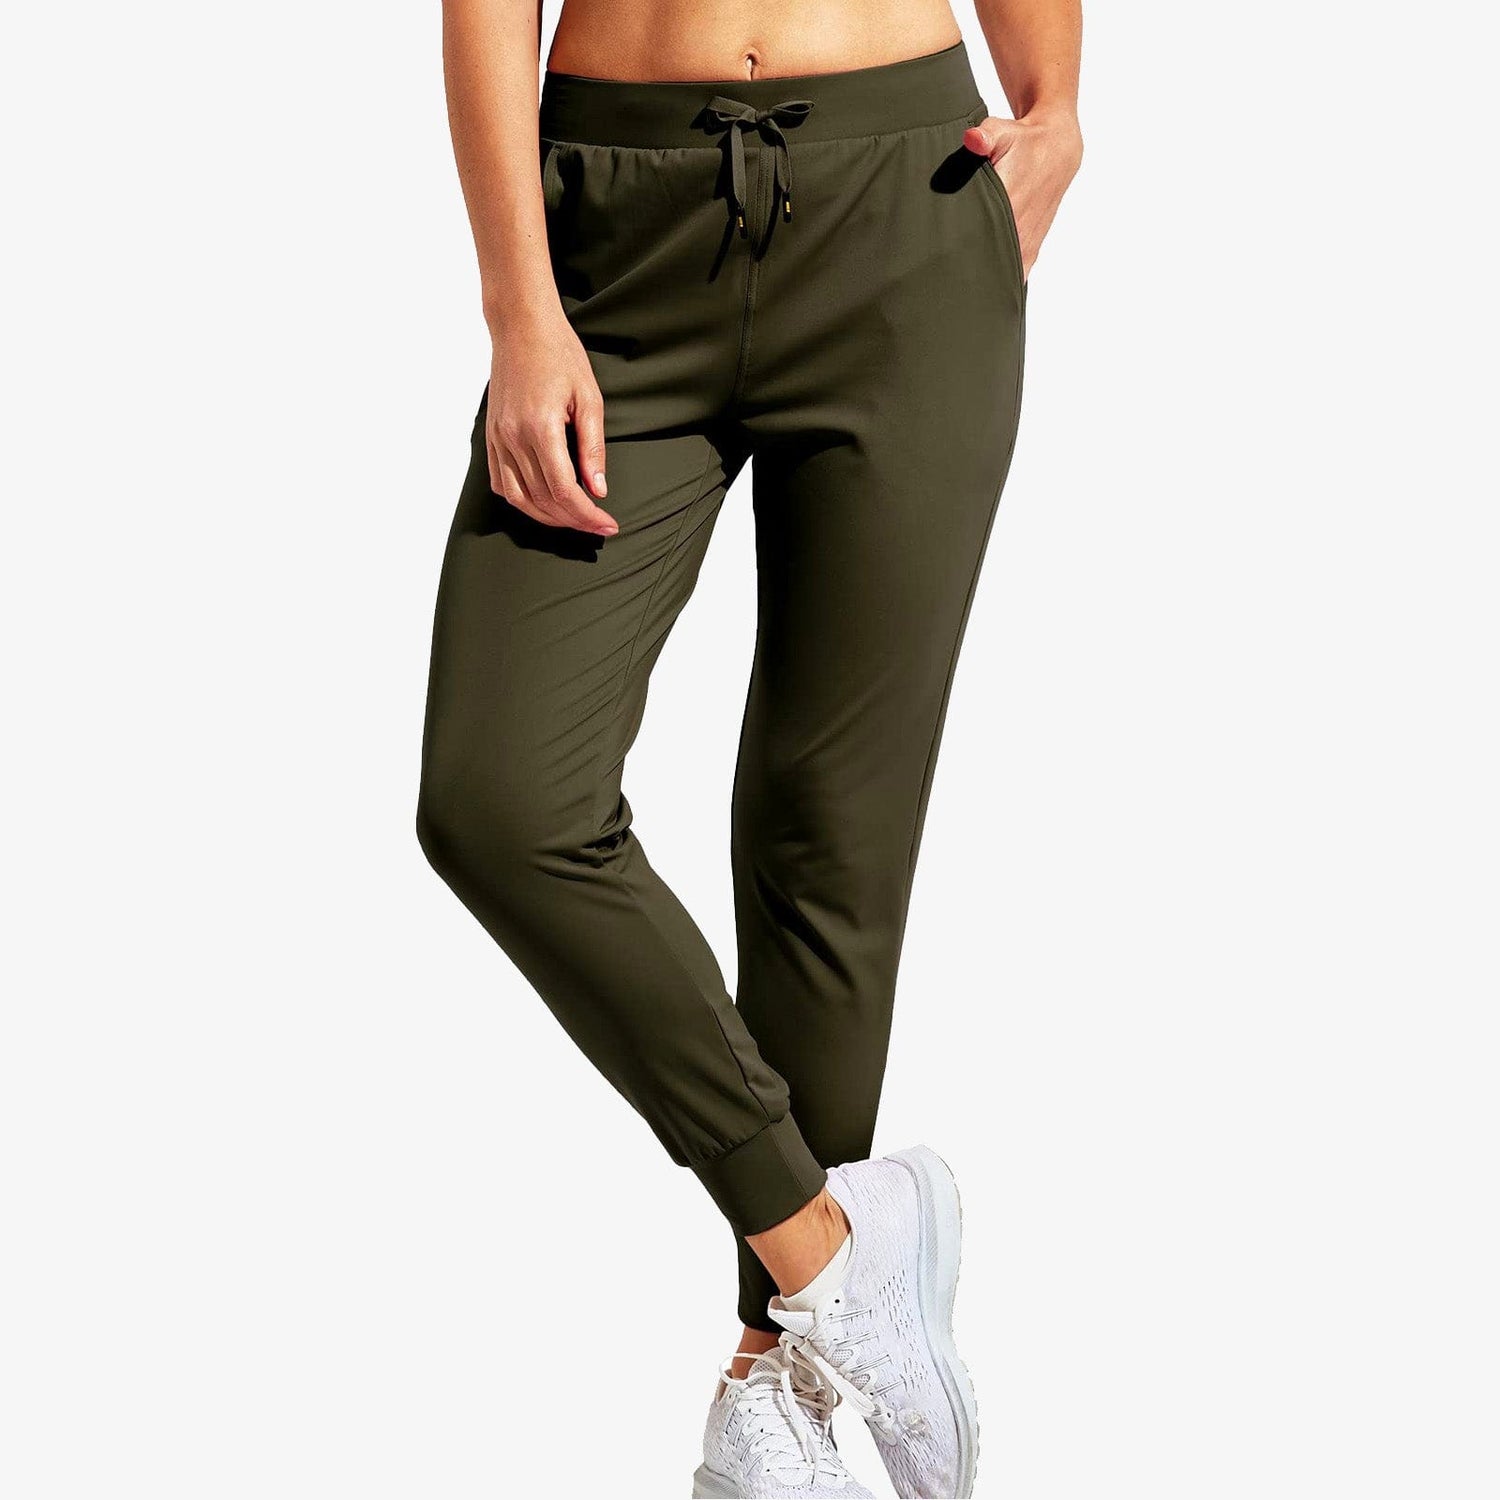 Women Joggers with Pockets Lightweight Athletic Sweatpants Women Active Pants Army Green / XS MIER